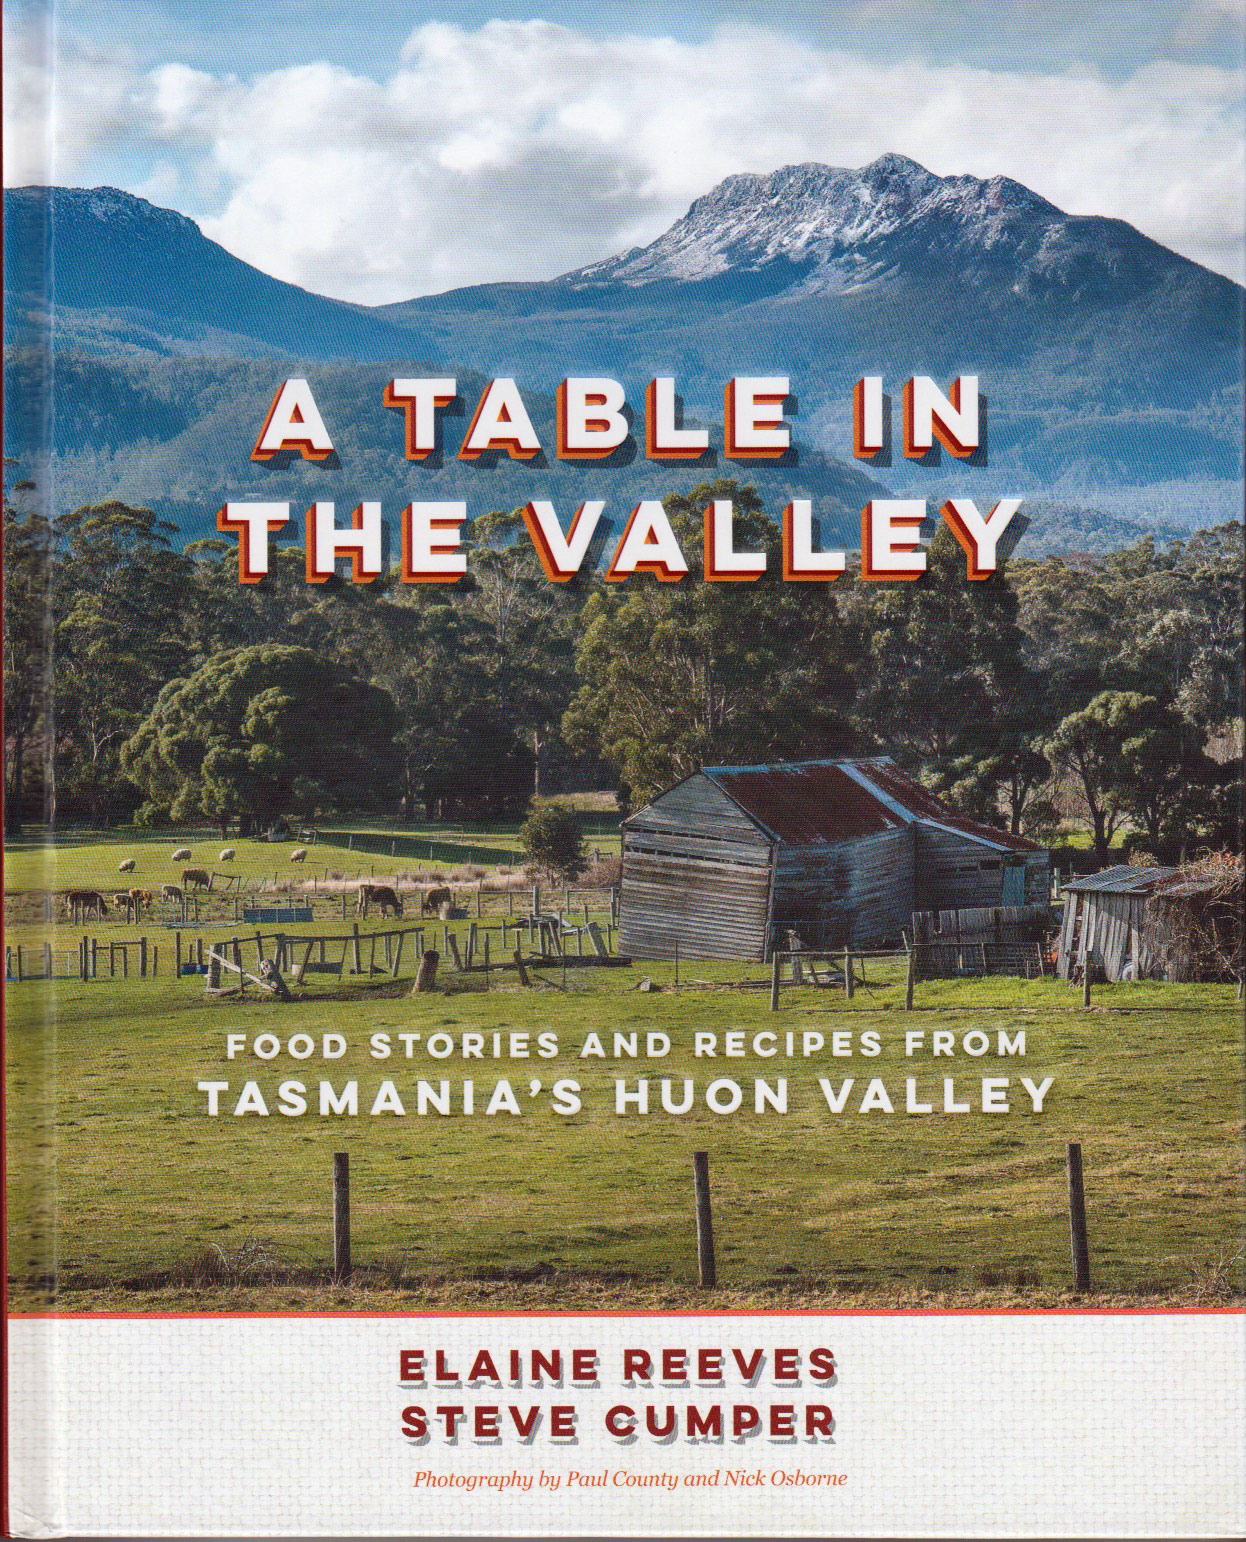 A Table in the Valley - Food Stories and Recipes from Tasmania's Huon Valley